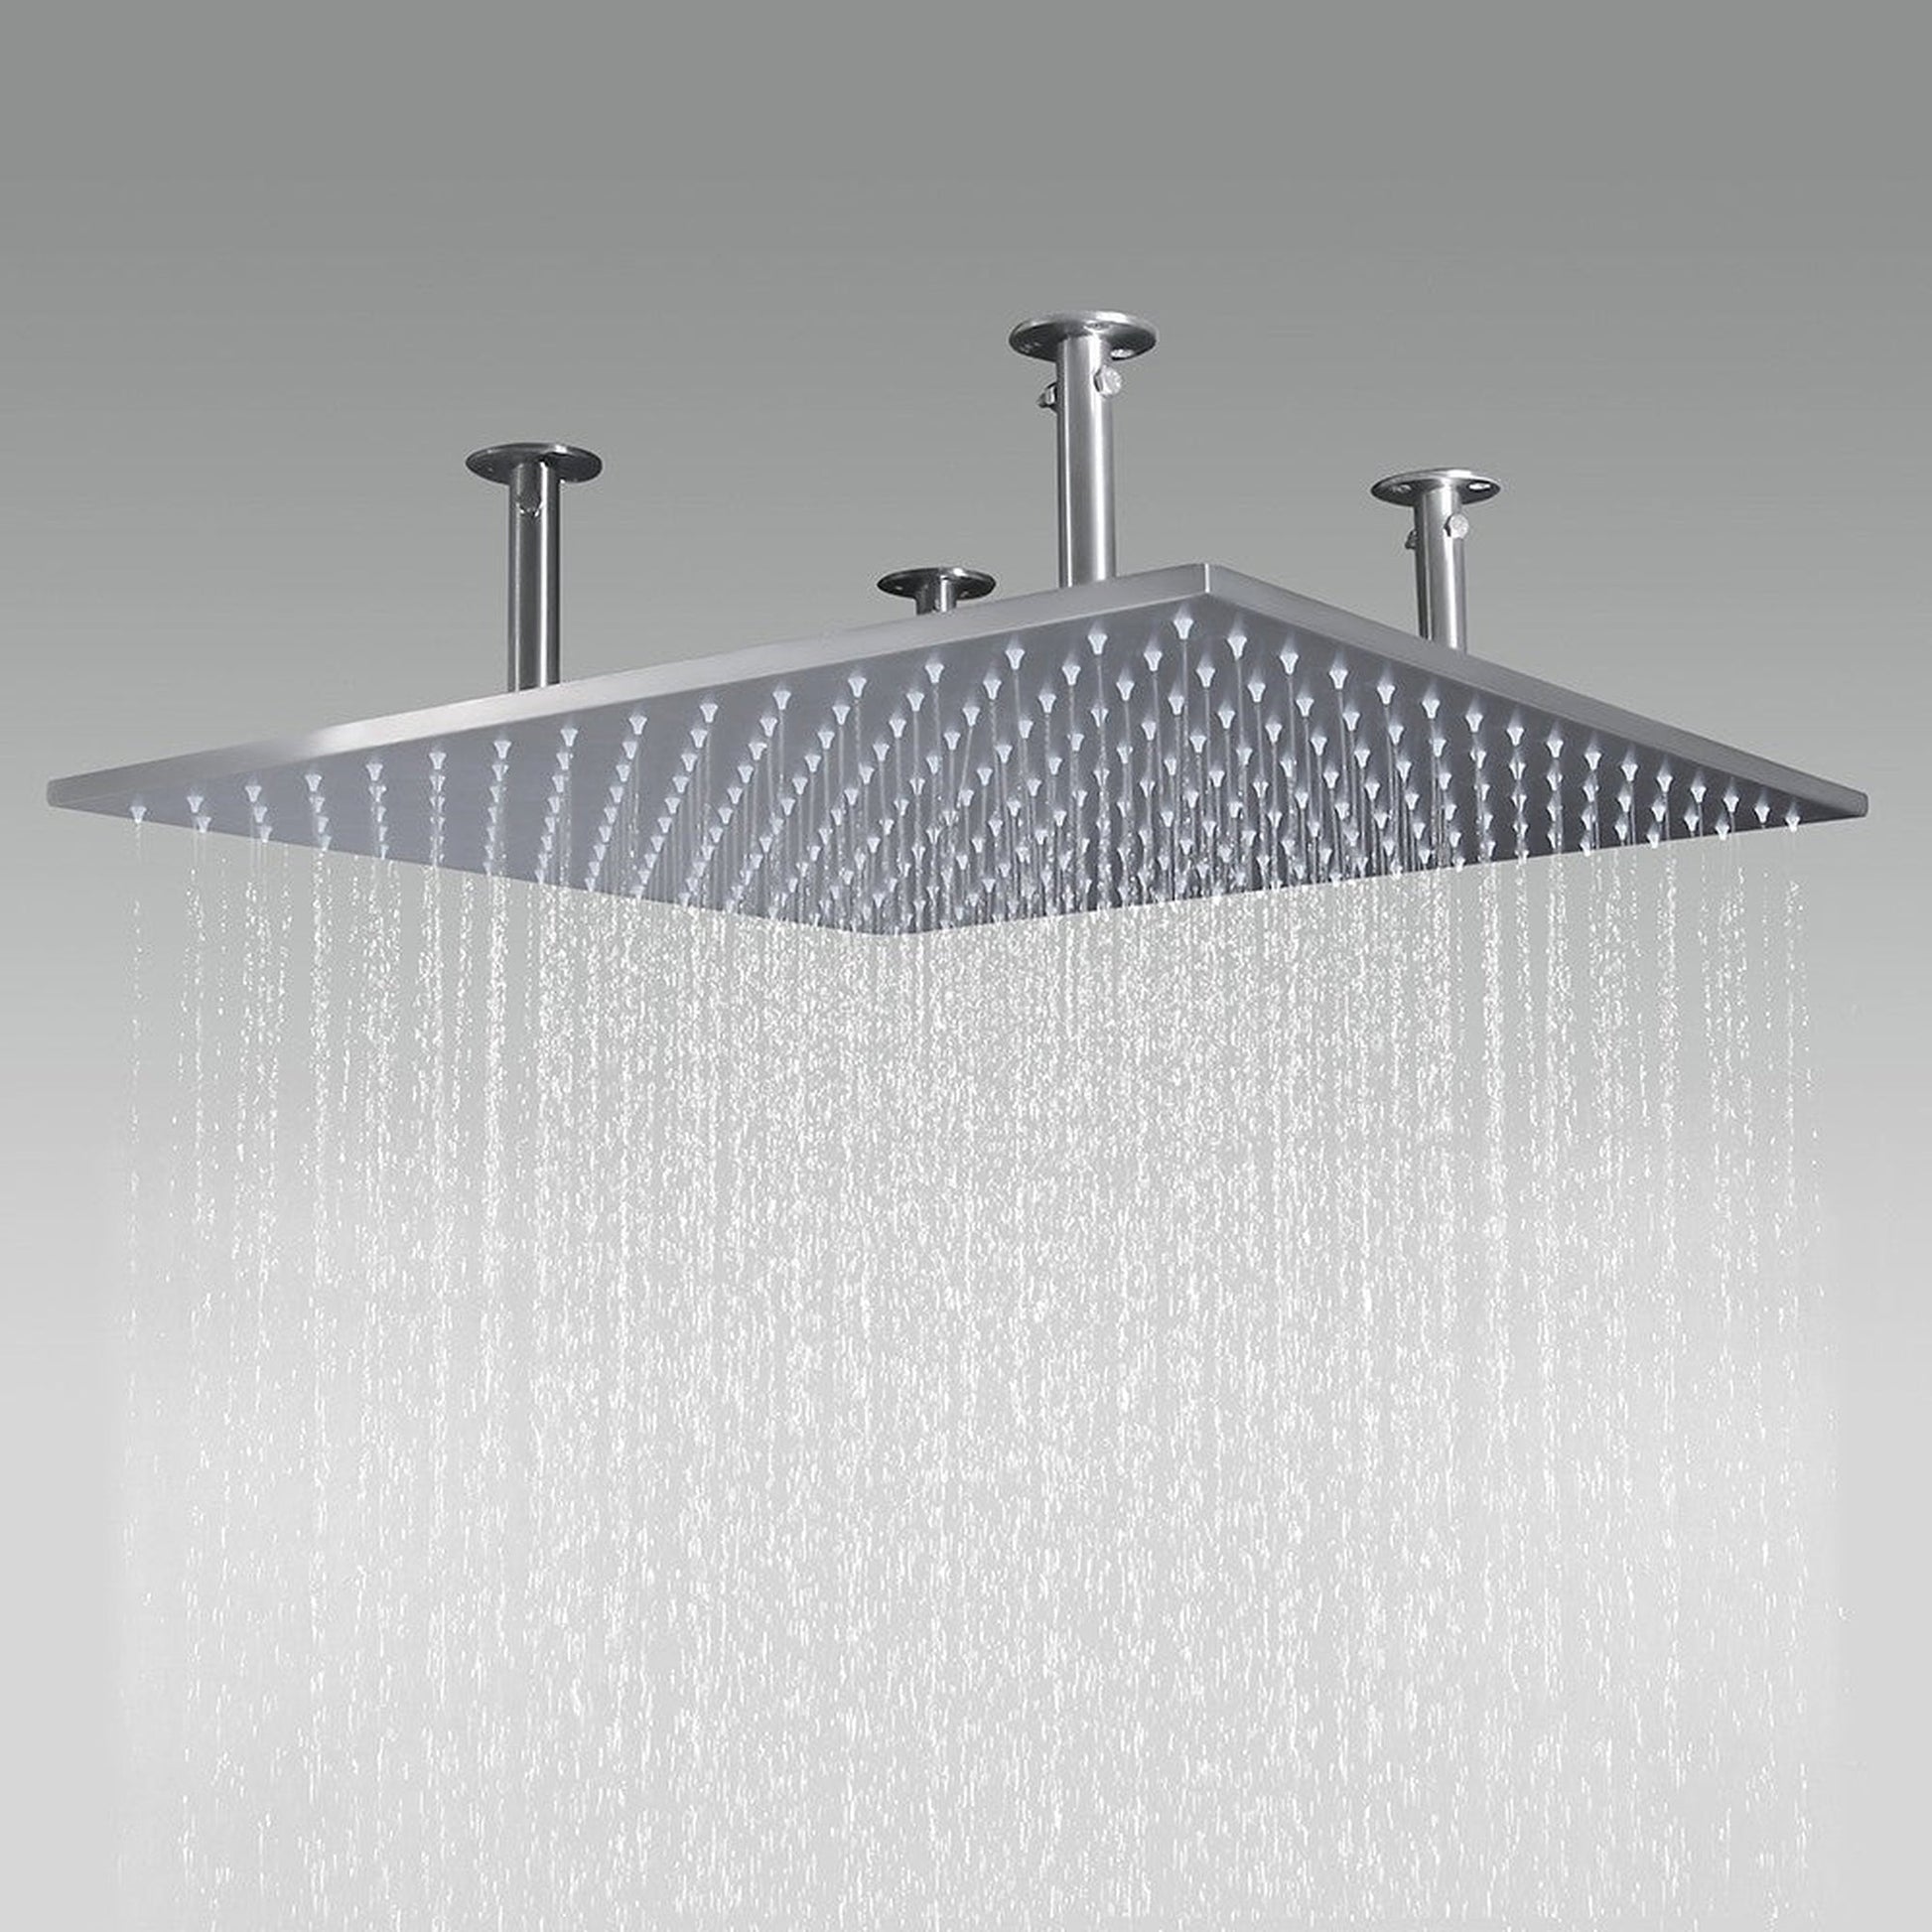 Fontana 24" x 24" Brushed Nickel Ceiling Mounted Thermostatic Valve Shower System With 3-Jet Sprays, Hand Shower and Without Water Powered LED Lights